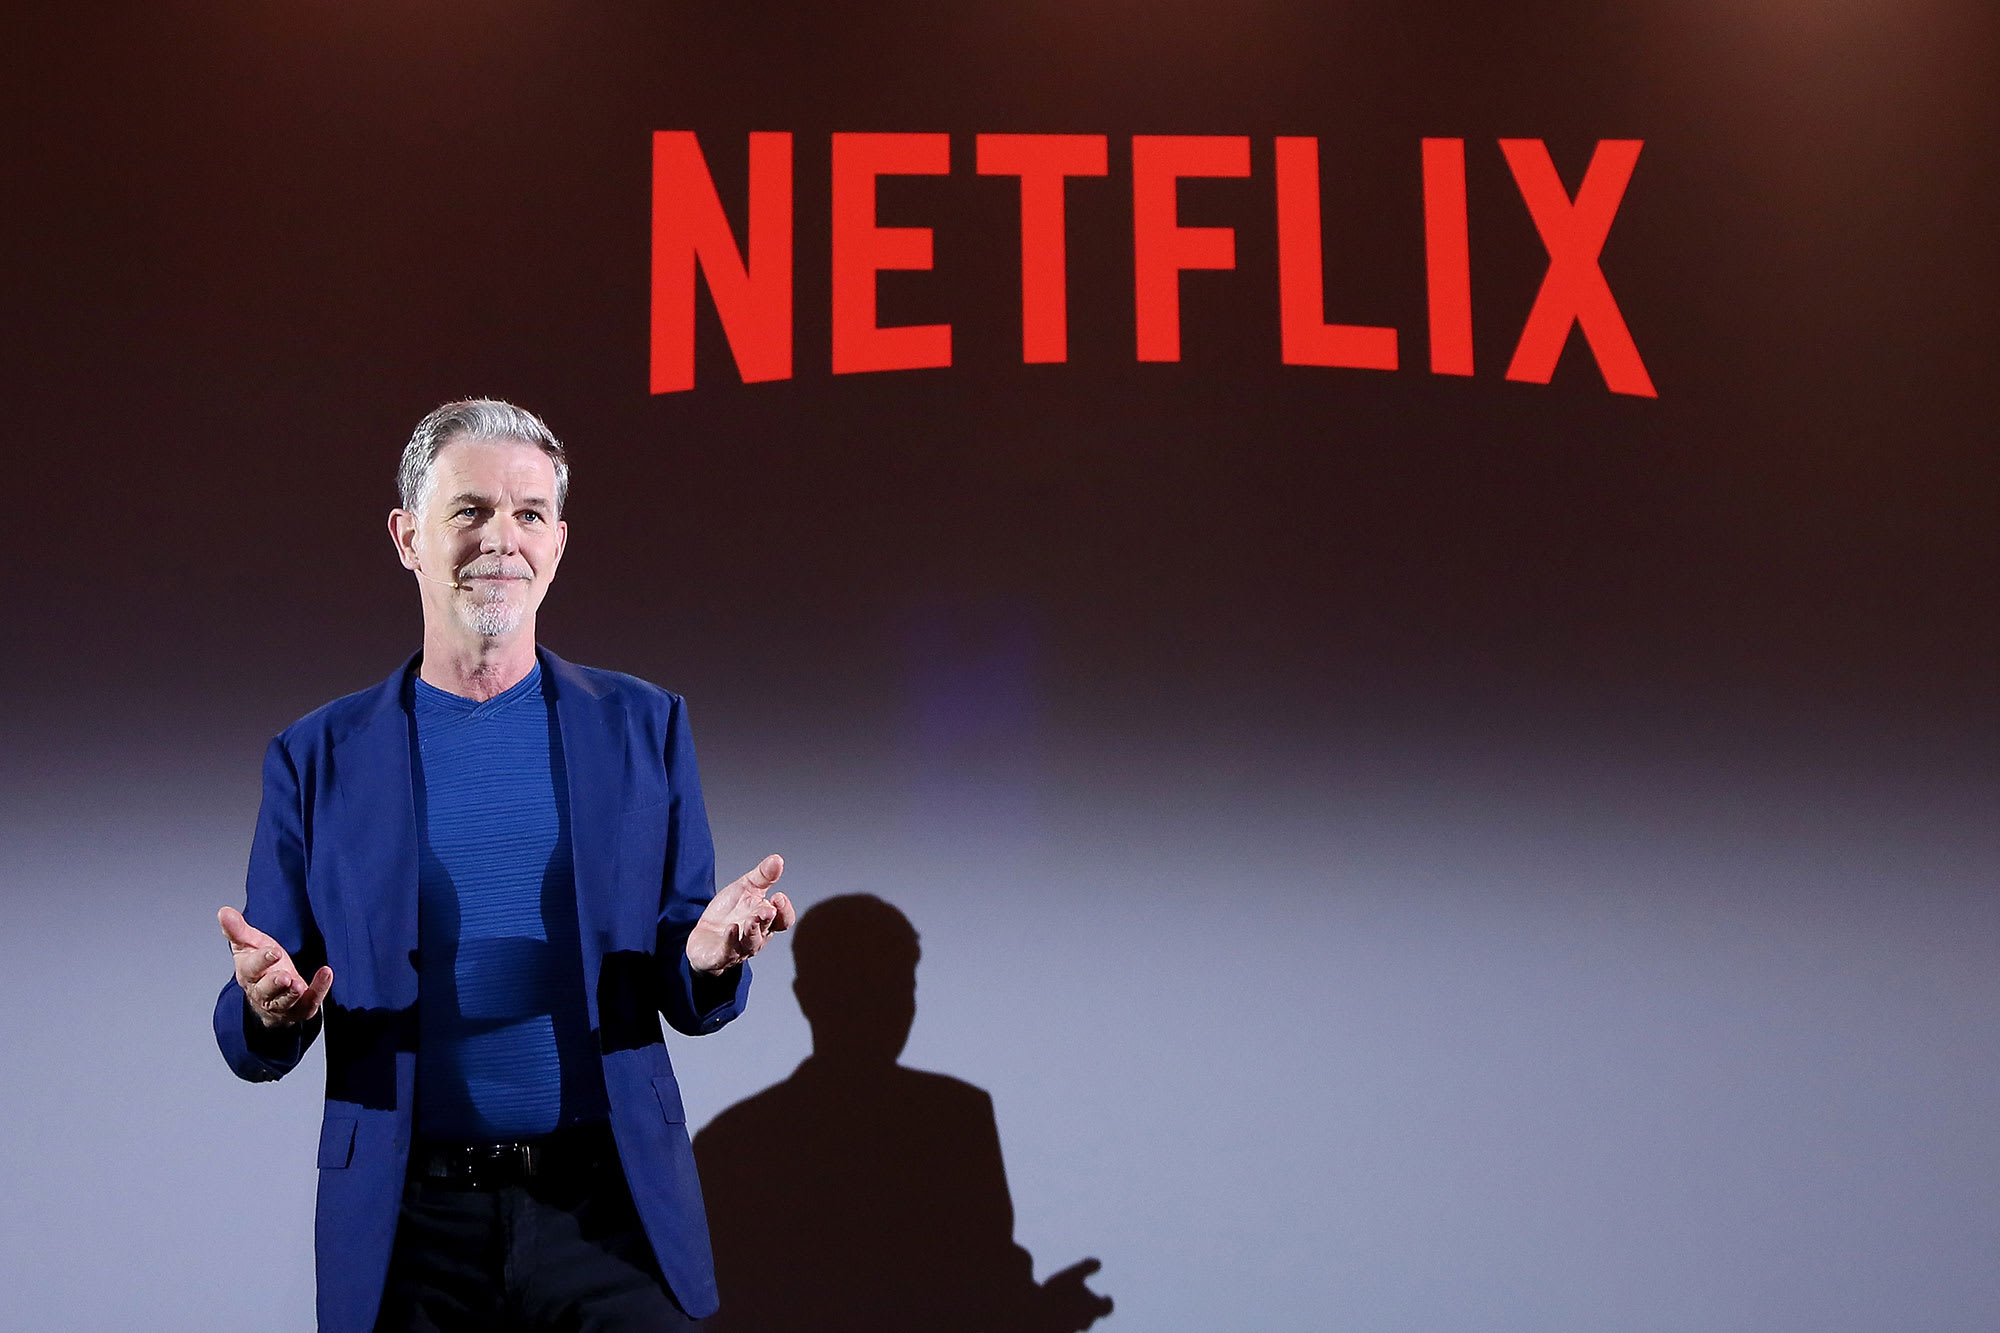 Netflix 'seeing significant reacceleration' in app downloads: BofA